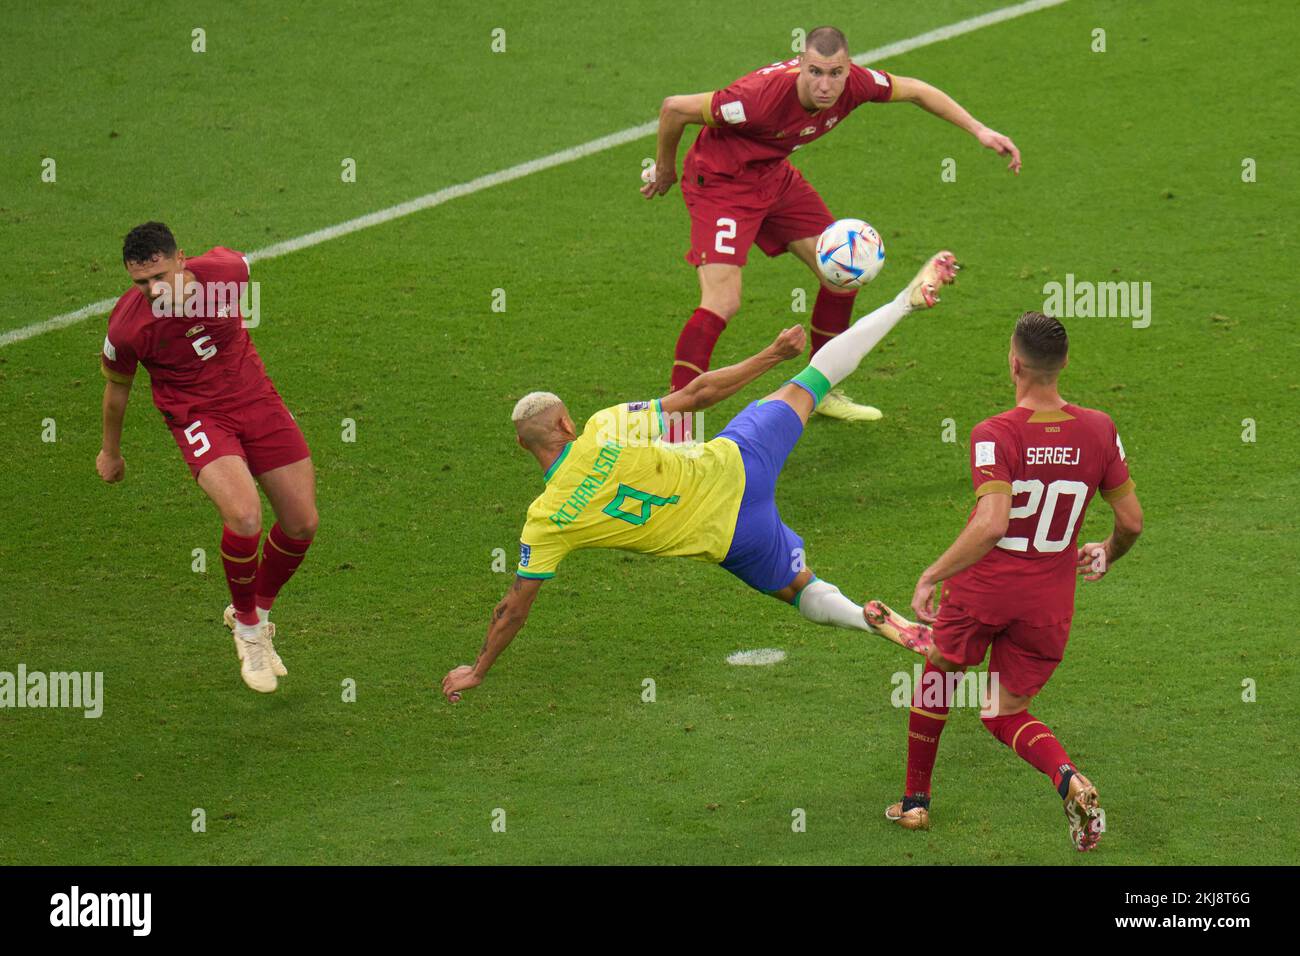 Lusail, Qatar. 24th Nov, 2022. Richarlison (C) shoots to score during the Group G match between Brazil and Serbia at the 2022 FIFA World Cup at Lusail Stadium in Lusail, Qatar, Nov. 24, 2022. Credit: Meng Dingbo/Xinhua/Alamy Live News Stock Photo